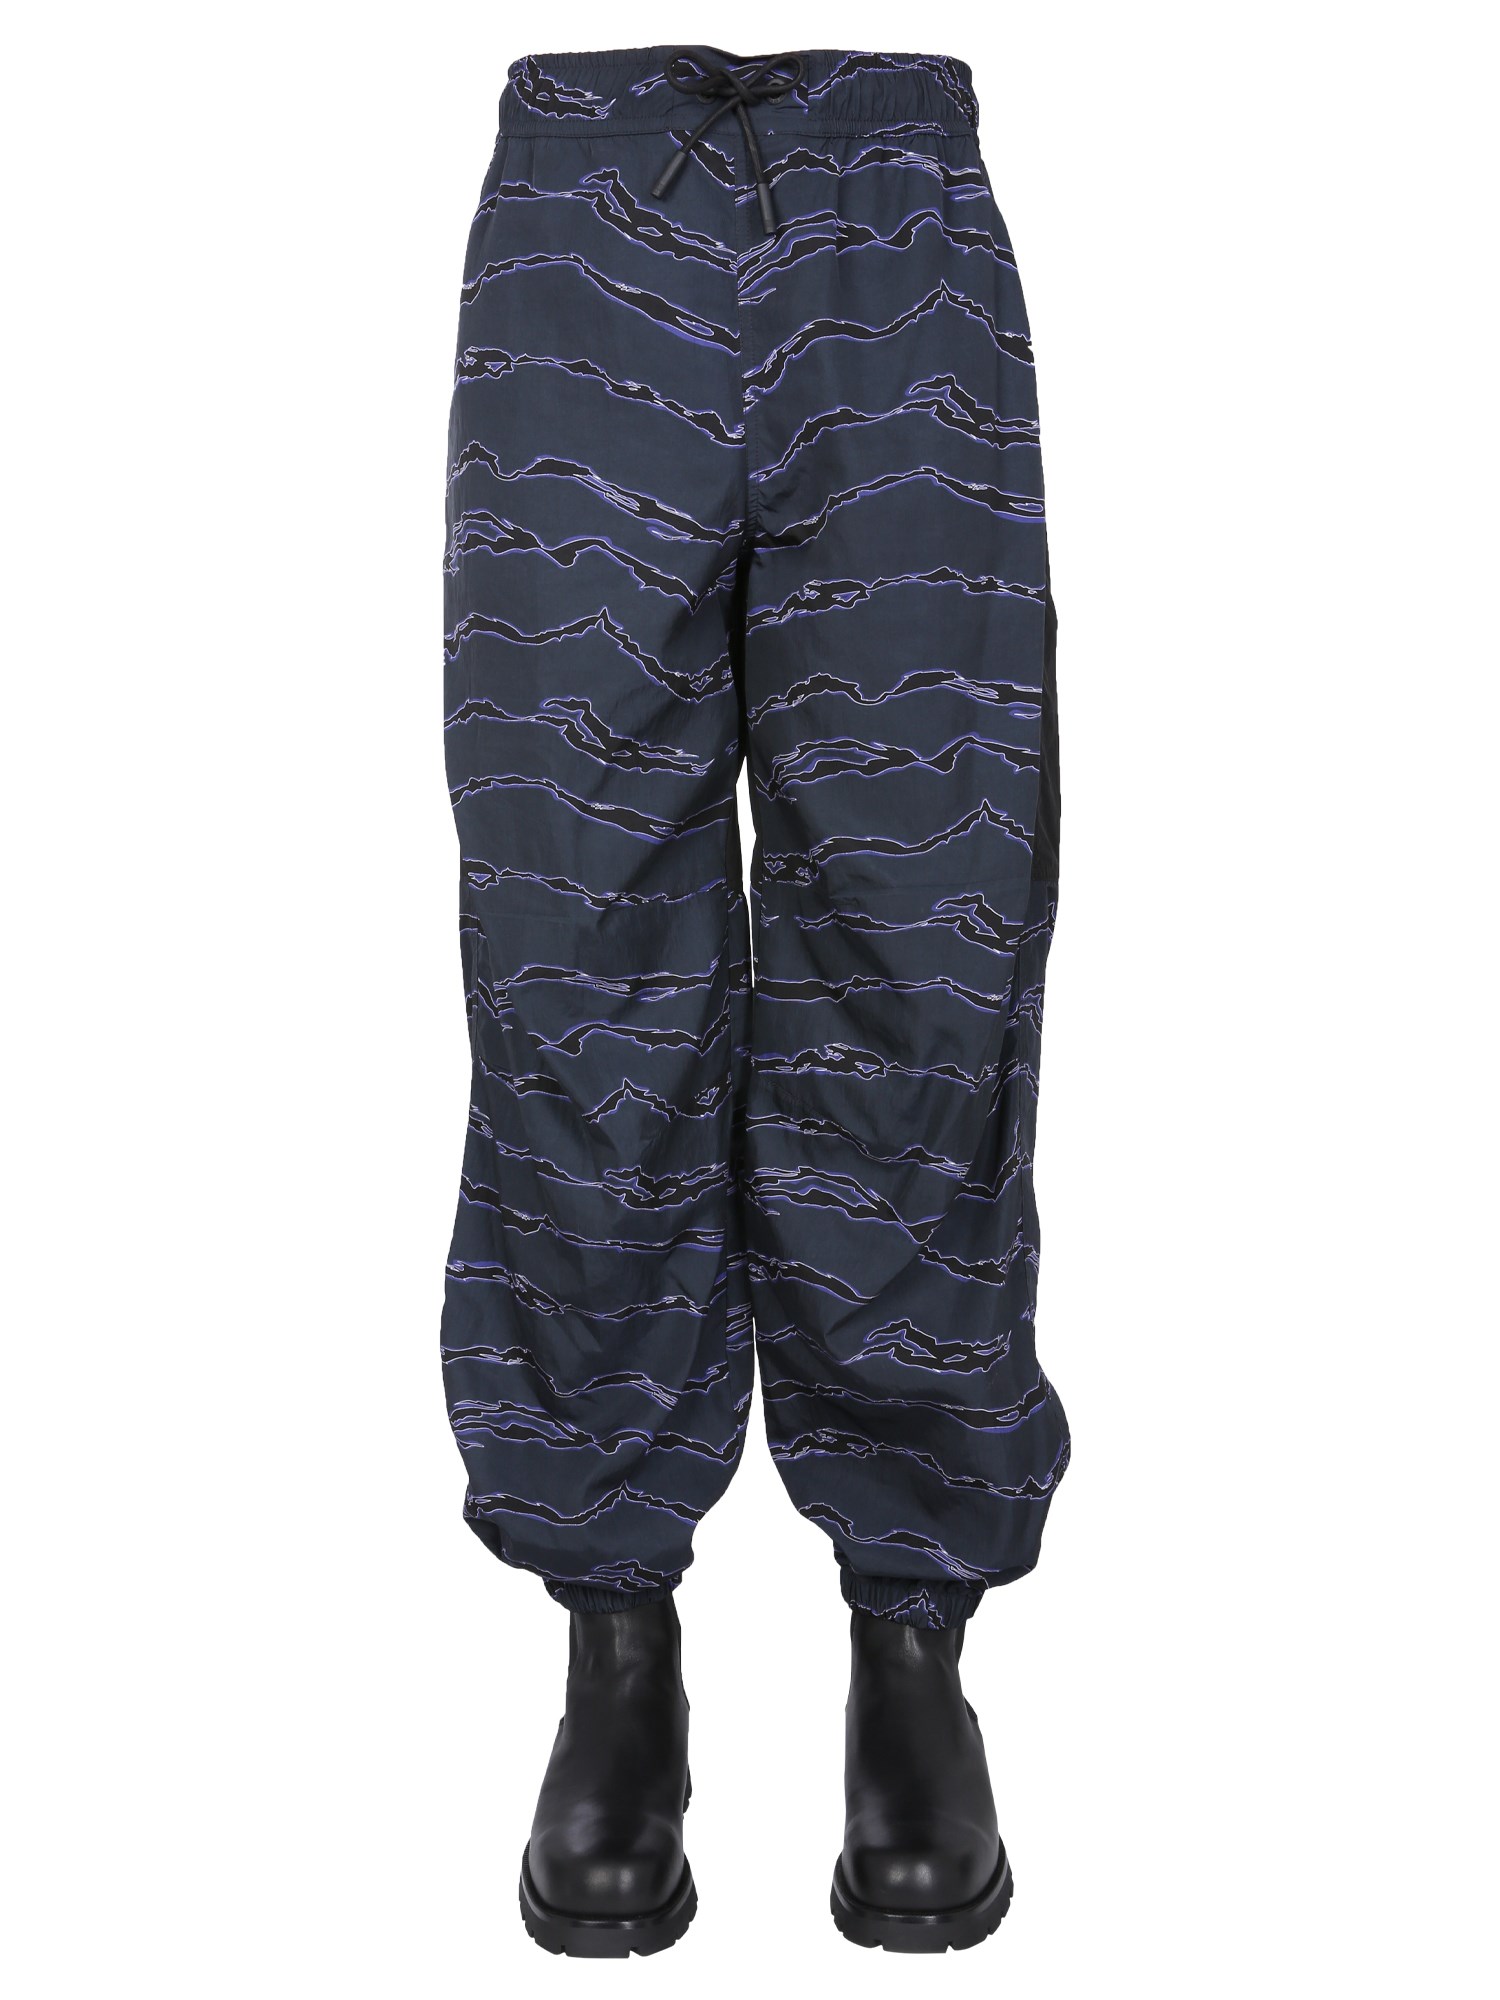 marcelo burlon county of milan jogging pants with camou print